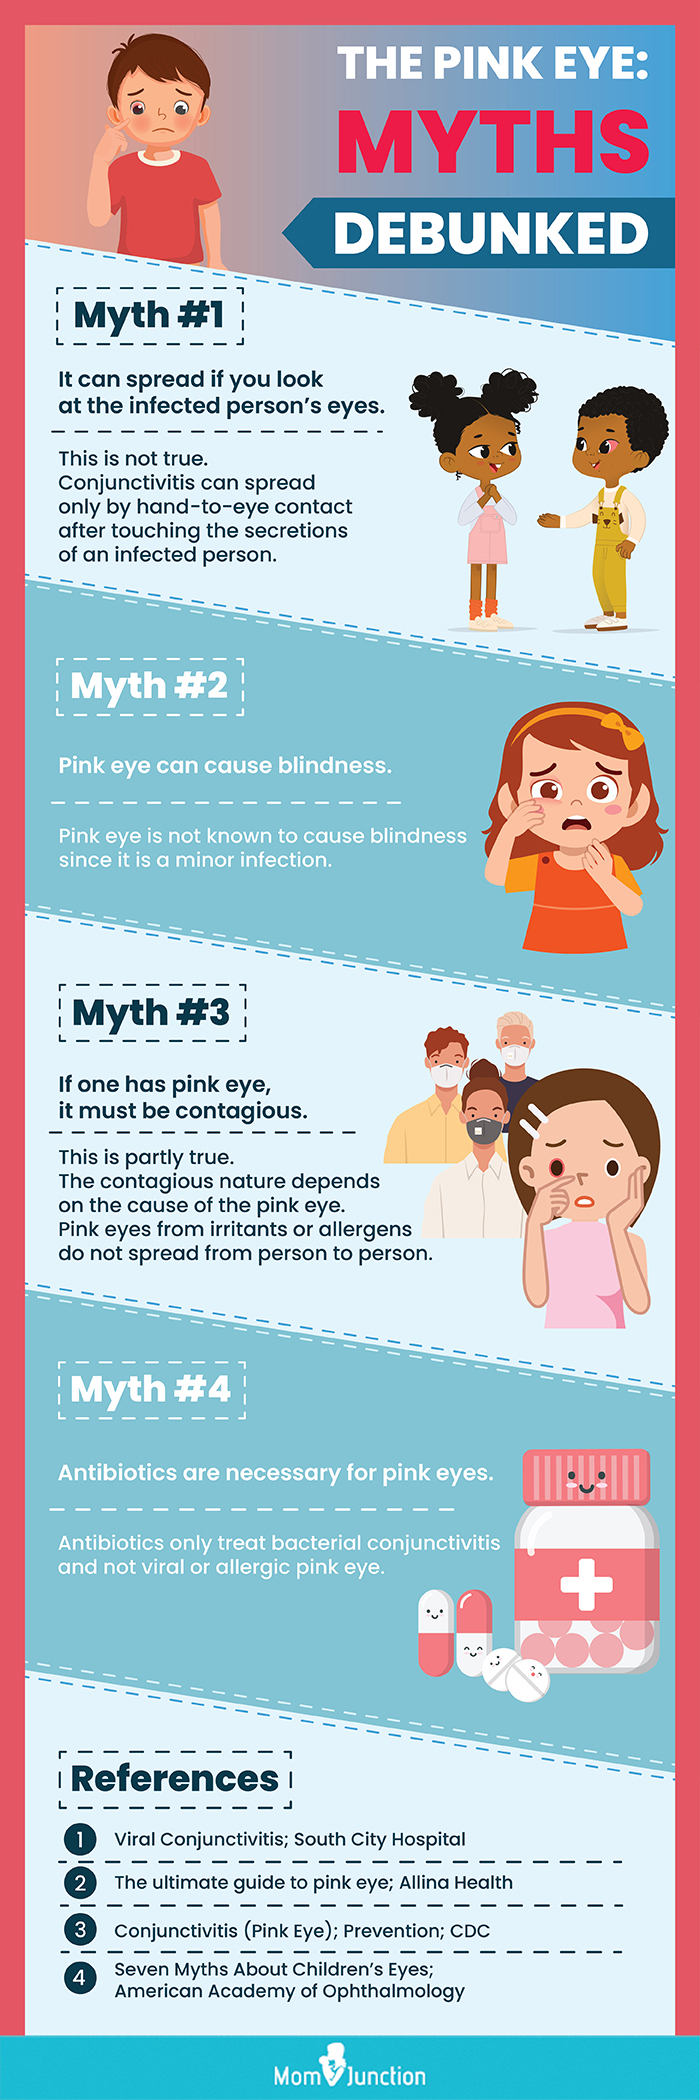 the pink eye myths debunked [infographic]